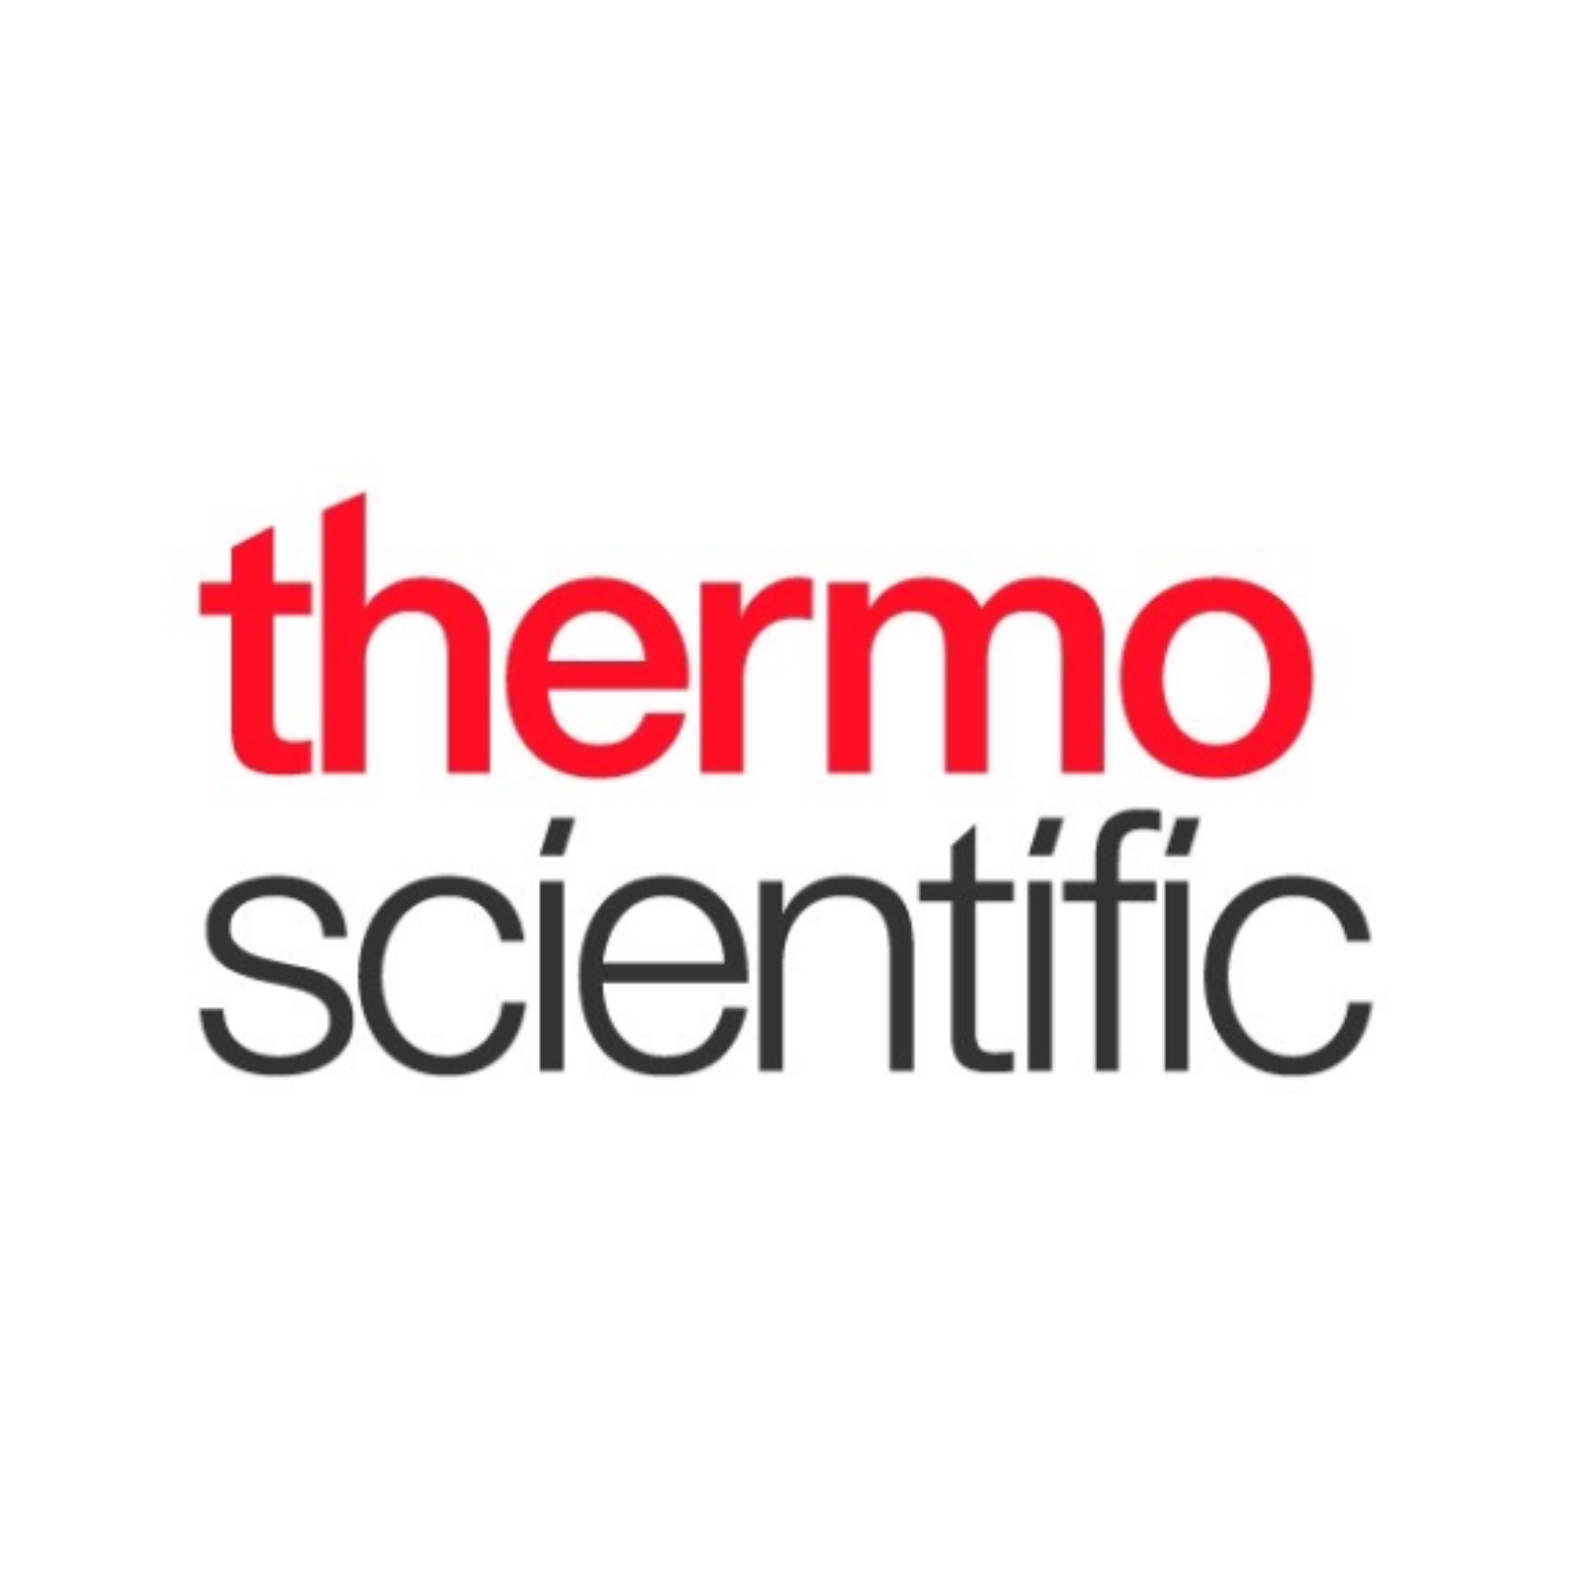 images/AFMS/Partners/ThermoScientific.jpg#joomlaImage://local-images/AFMS/Partners/ThermoScientific.jpg?width=1570&height=1570